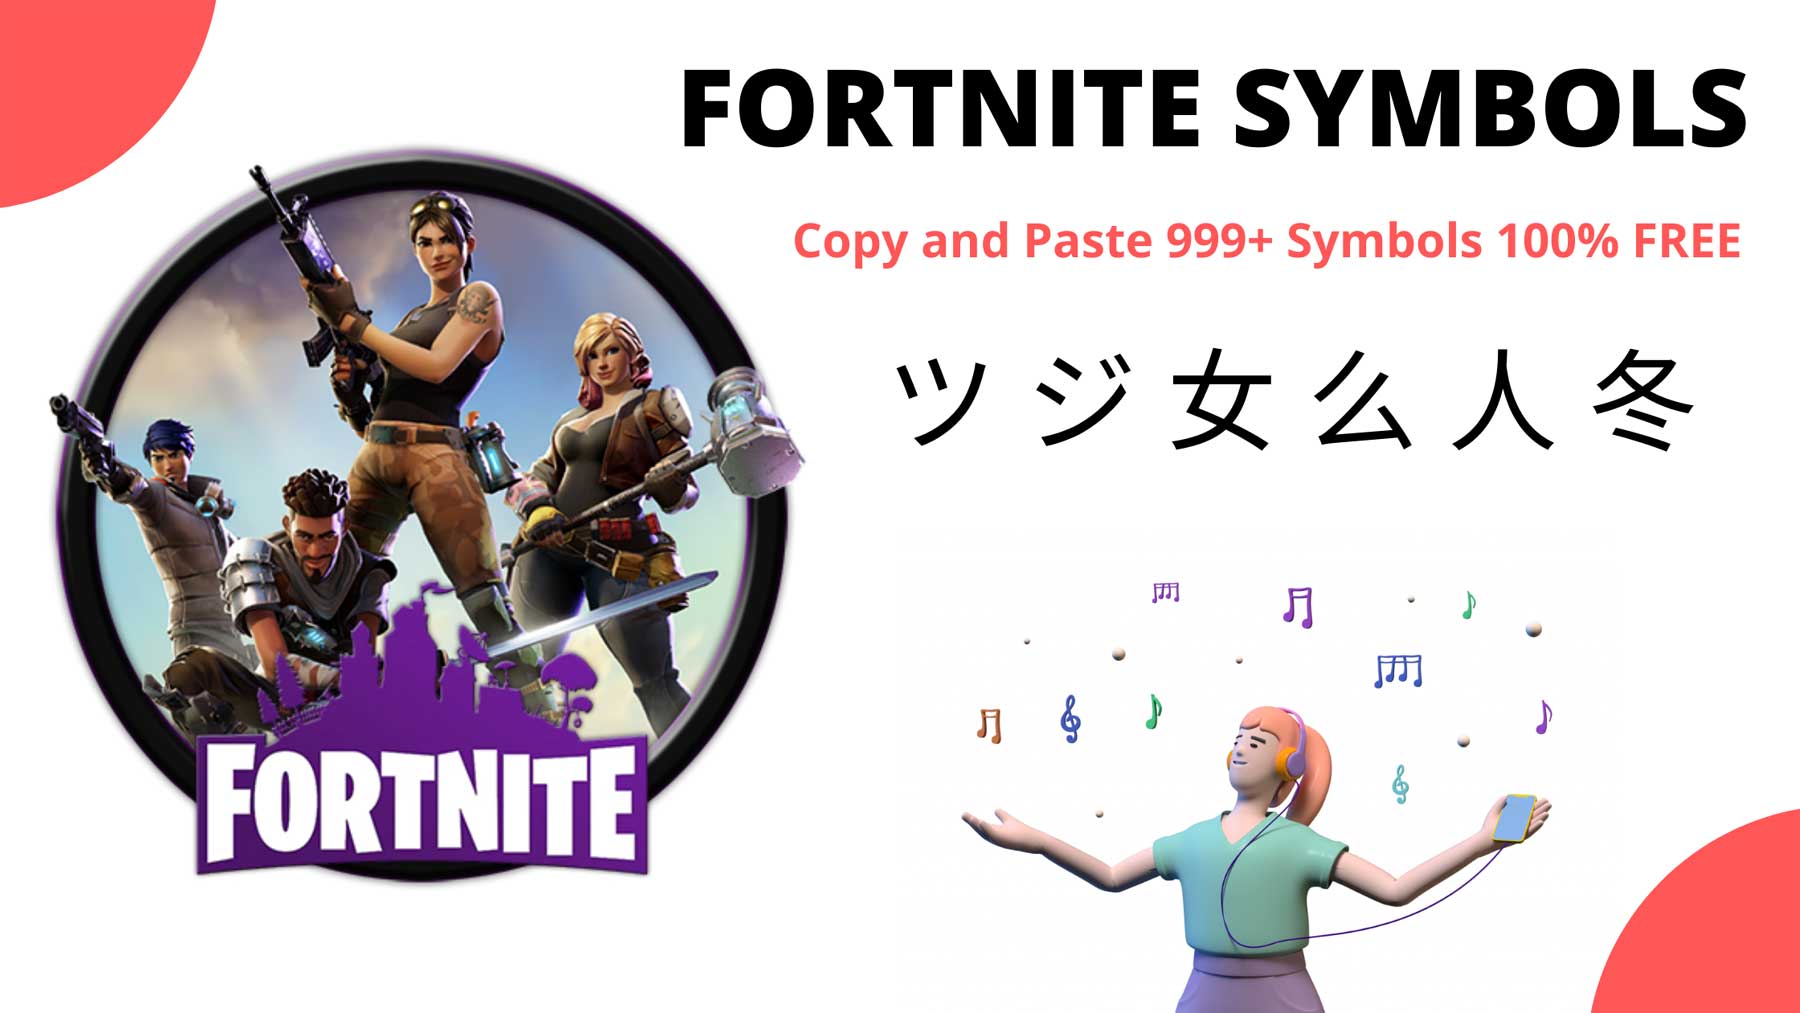 cool-symbols-copy-and-paste-fortnite-letter-emojis-copy-and-paste-my